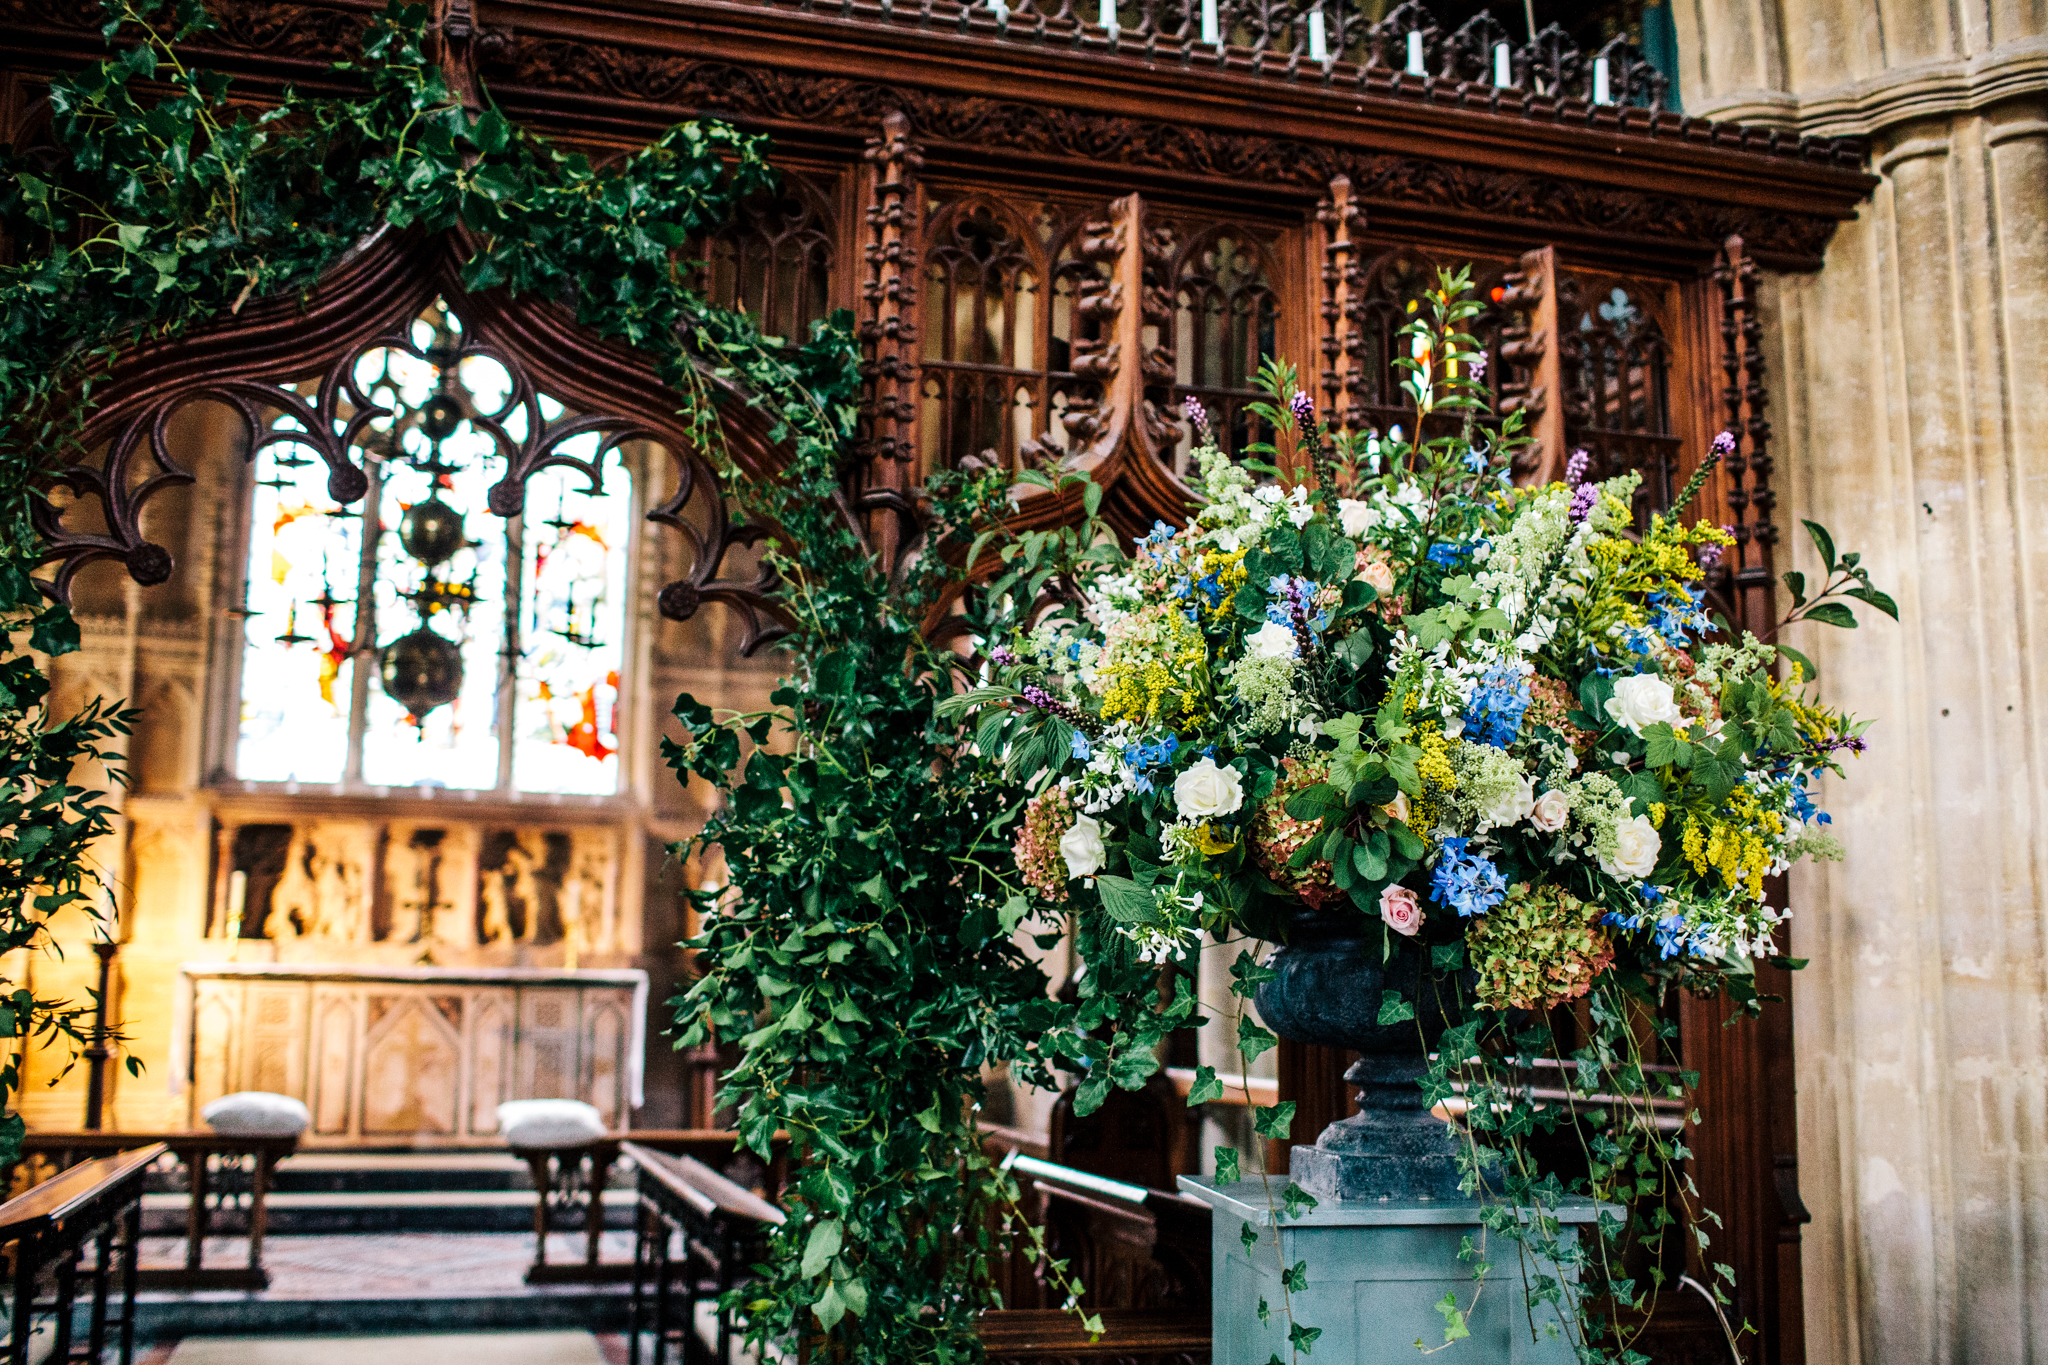 huge floral display inside St.Andrews church in Mells, near frome